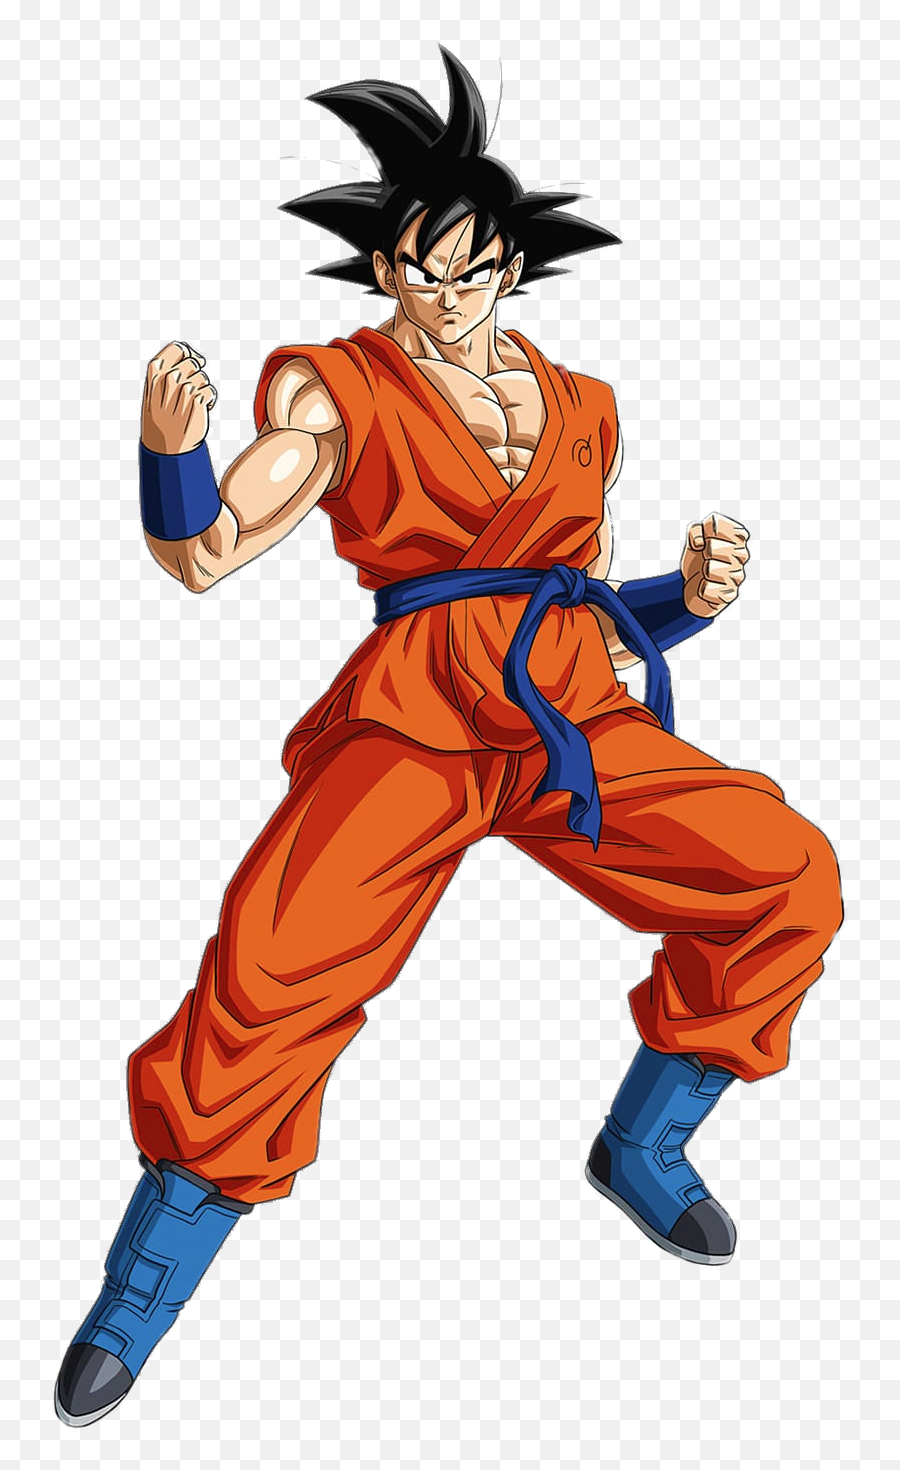 Check Out This Transparent Dragon Ball Upward Punch Png Image Emoji,Punch Png